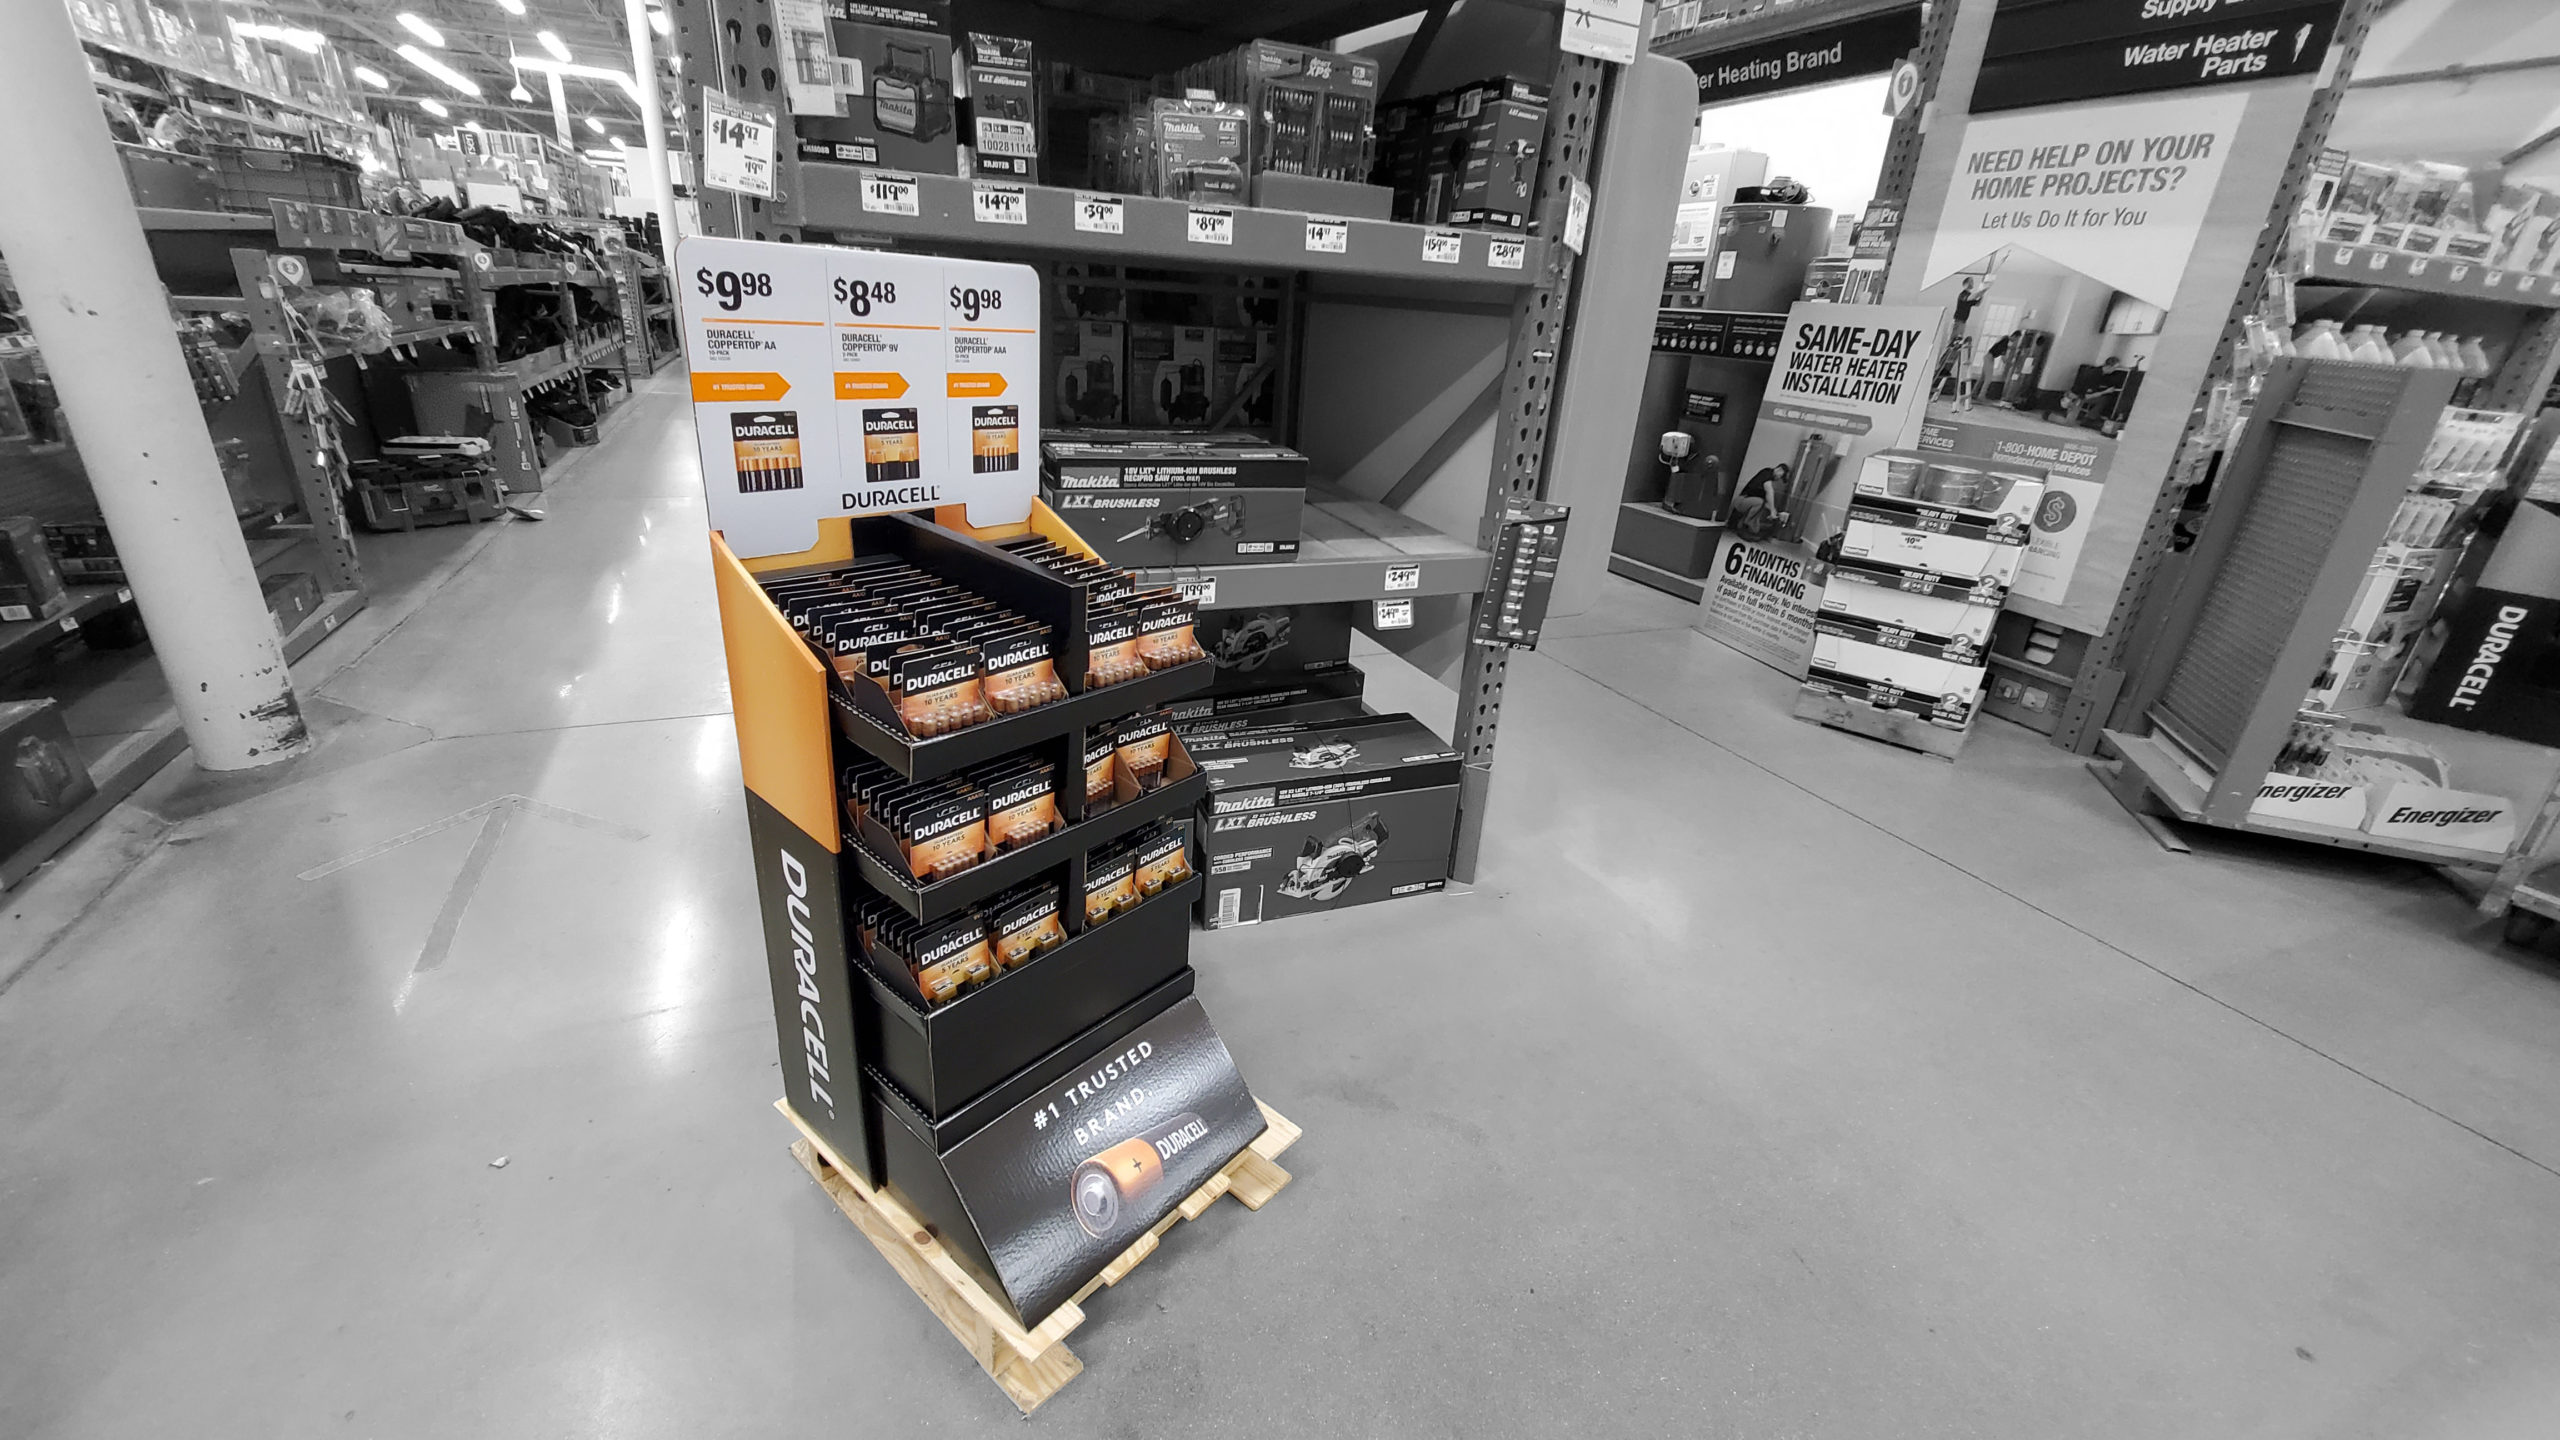 Duracell at Home Depot